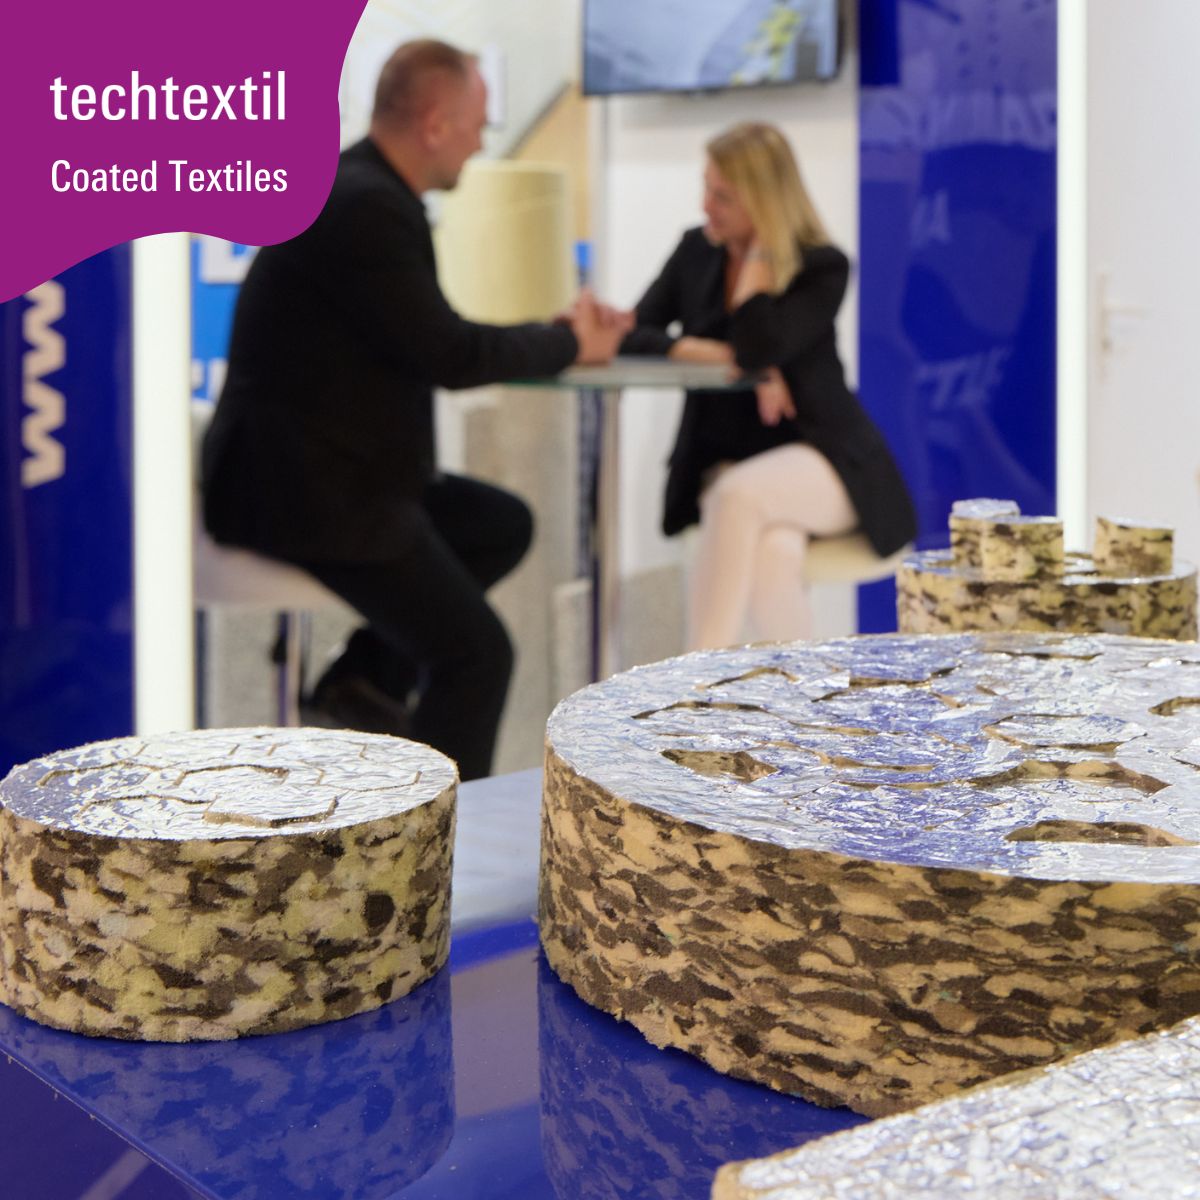 Techtextil highlights a wide range of technical textiles for industries like automotive, medicine and fashion. 12 application areas structure the range of products and services for various industries. Discover all textile solutions at techtextil.com #techtextil #textiles